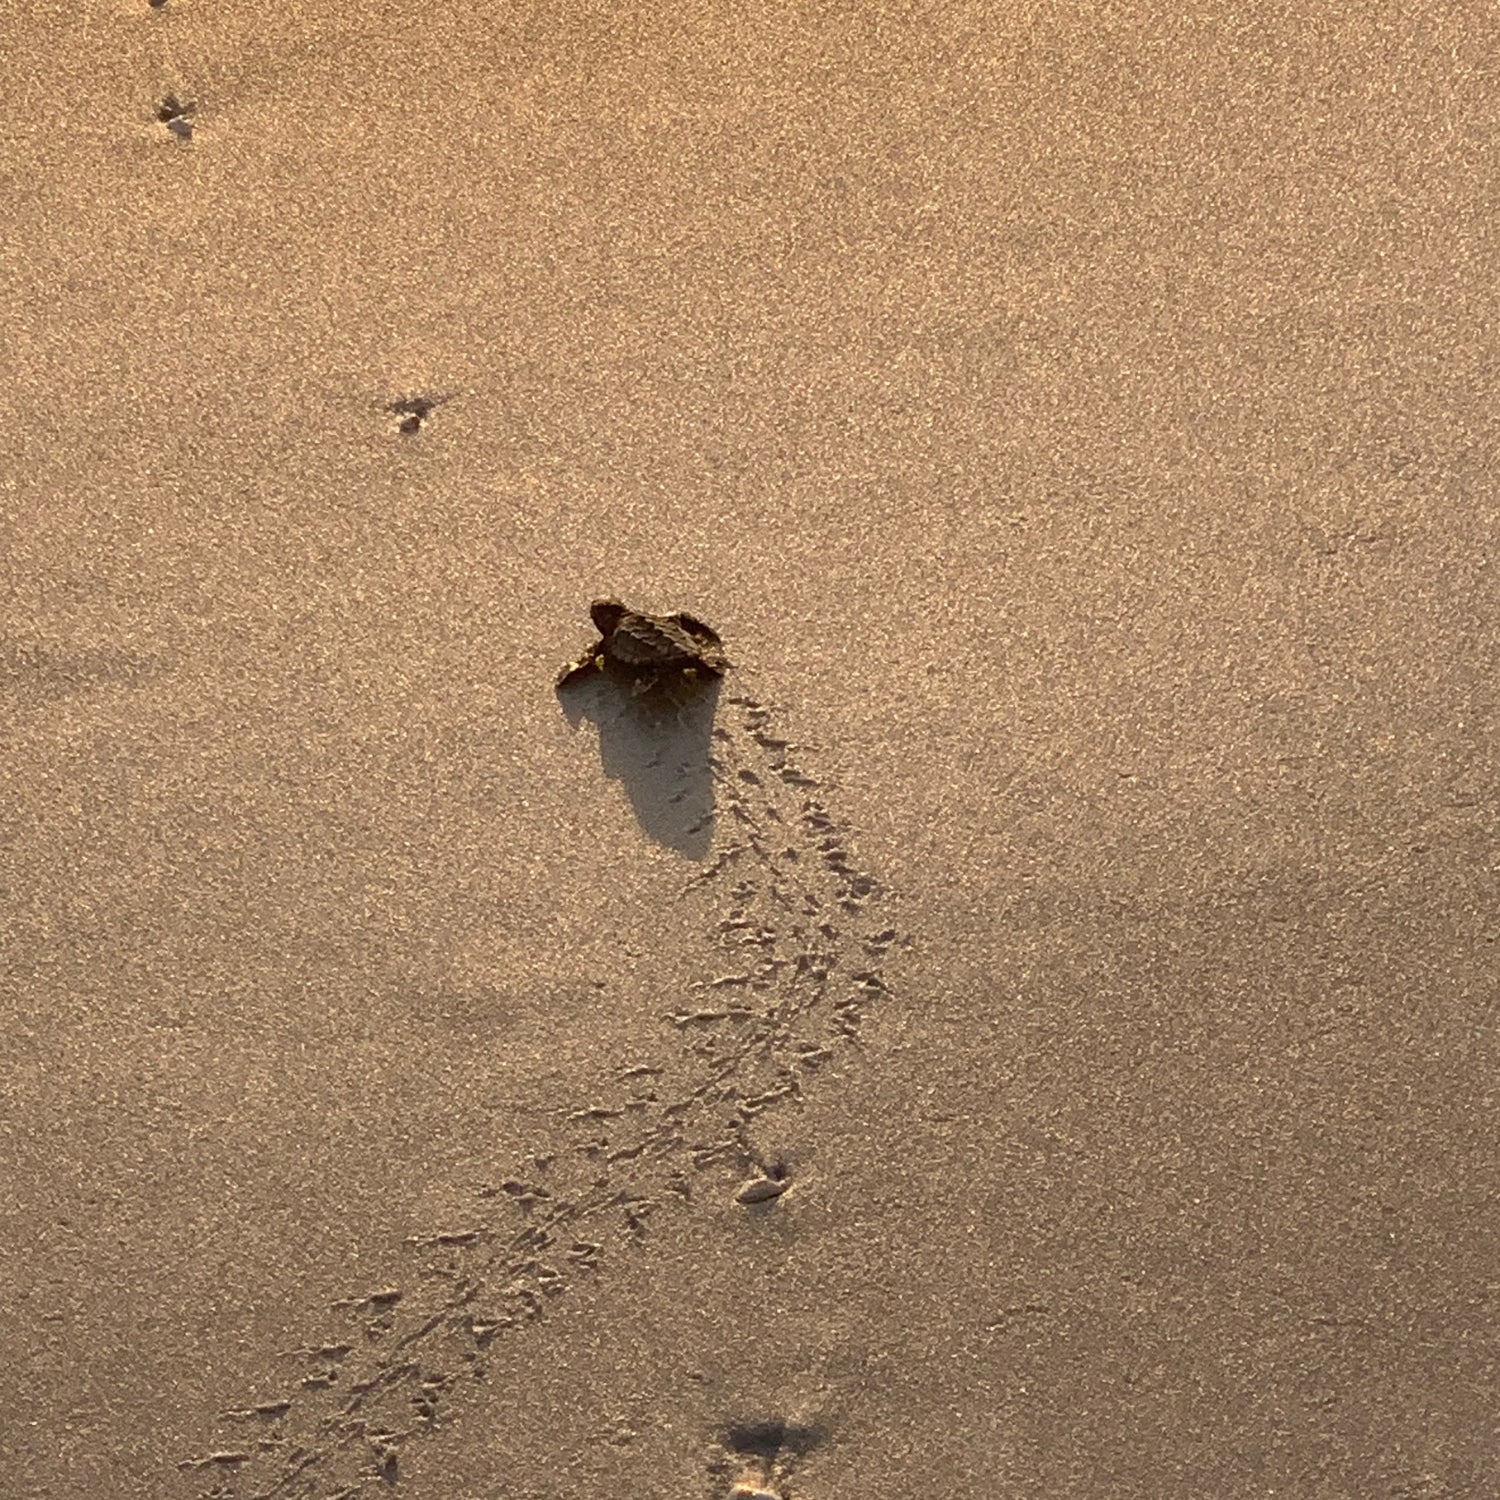 A baby turtle on the way to the ocean